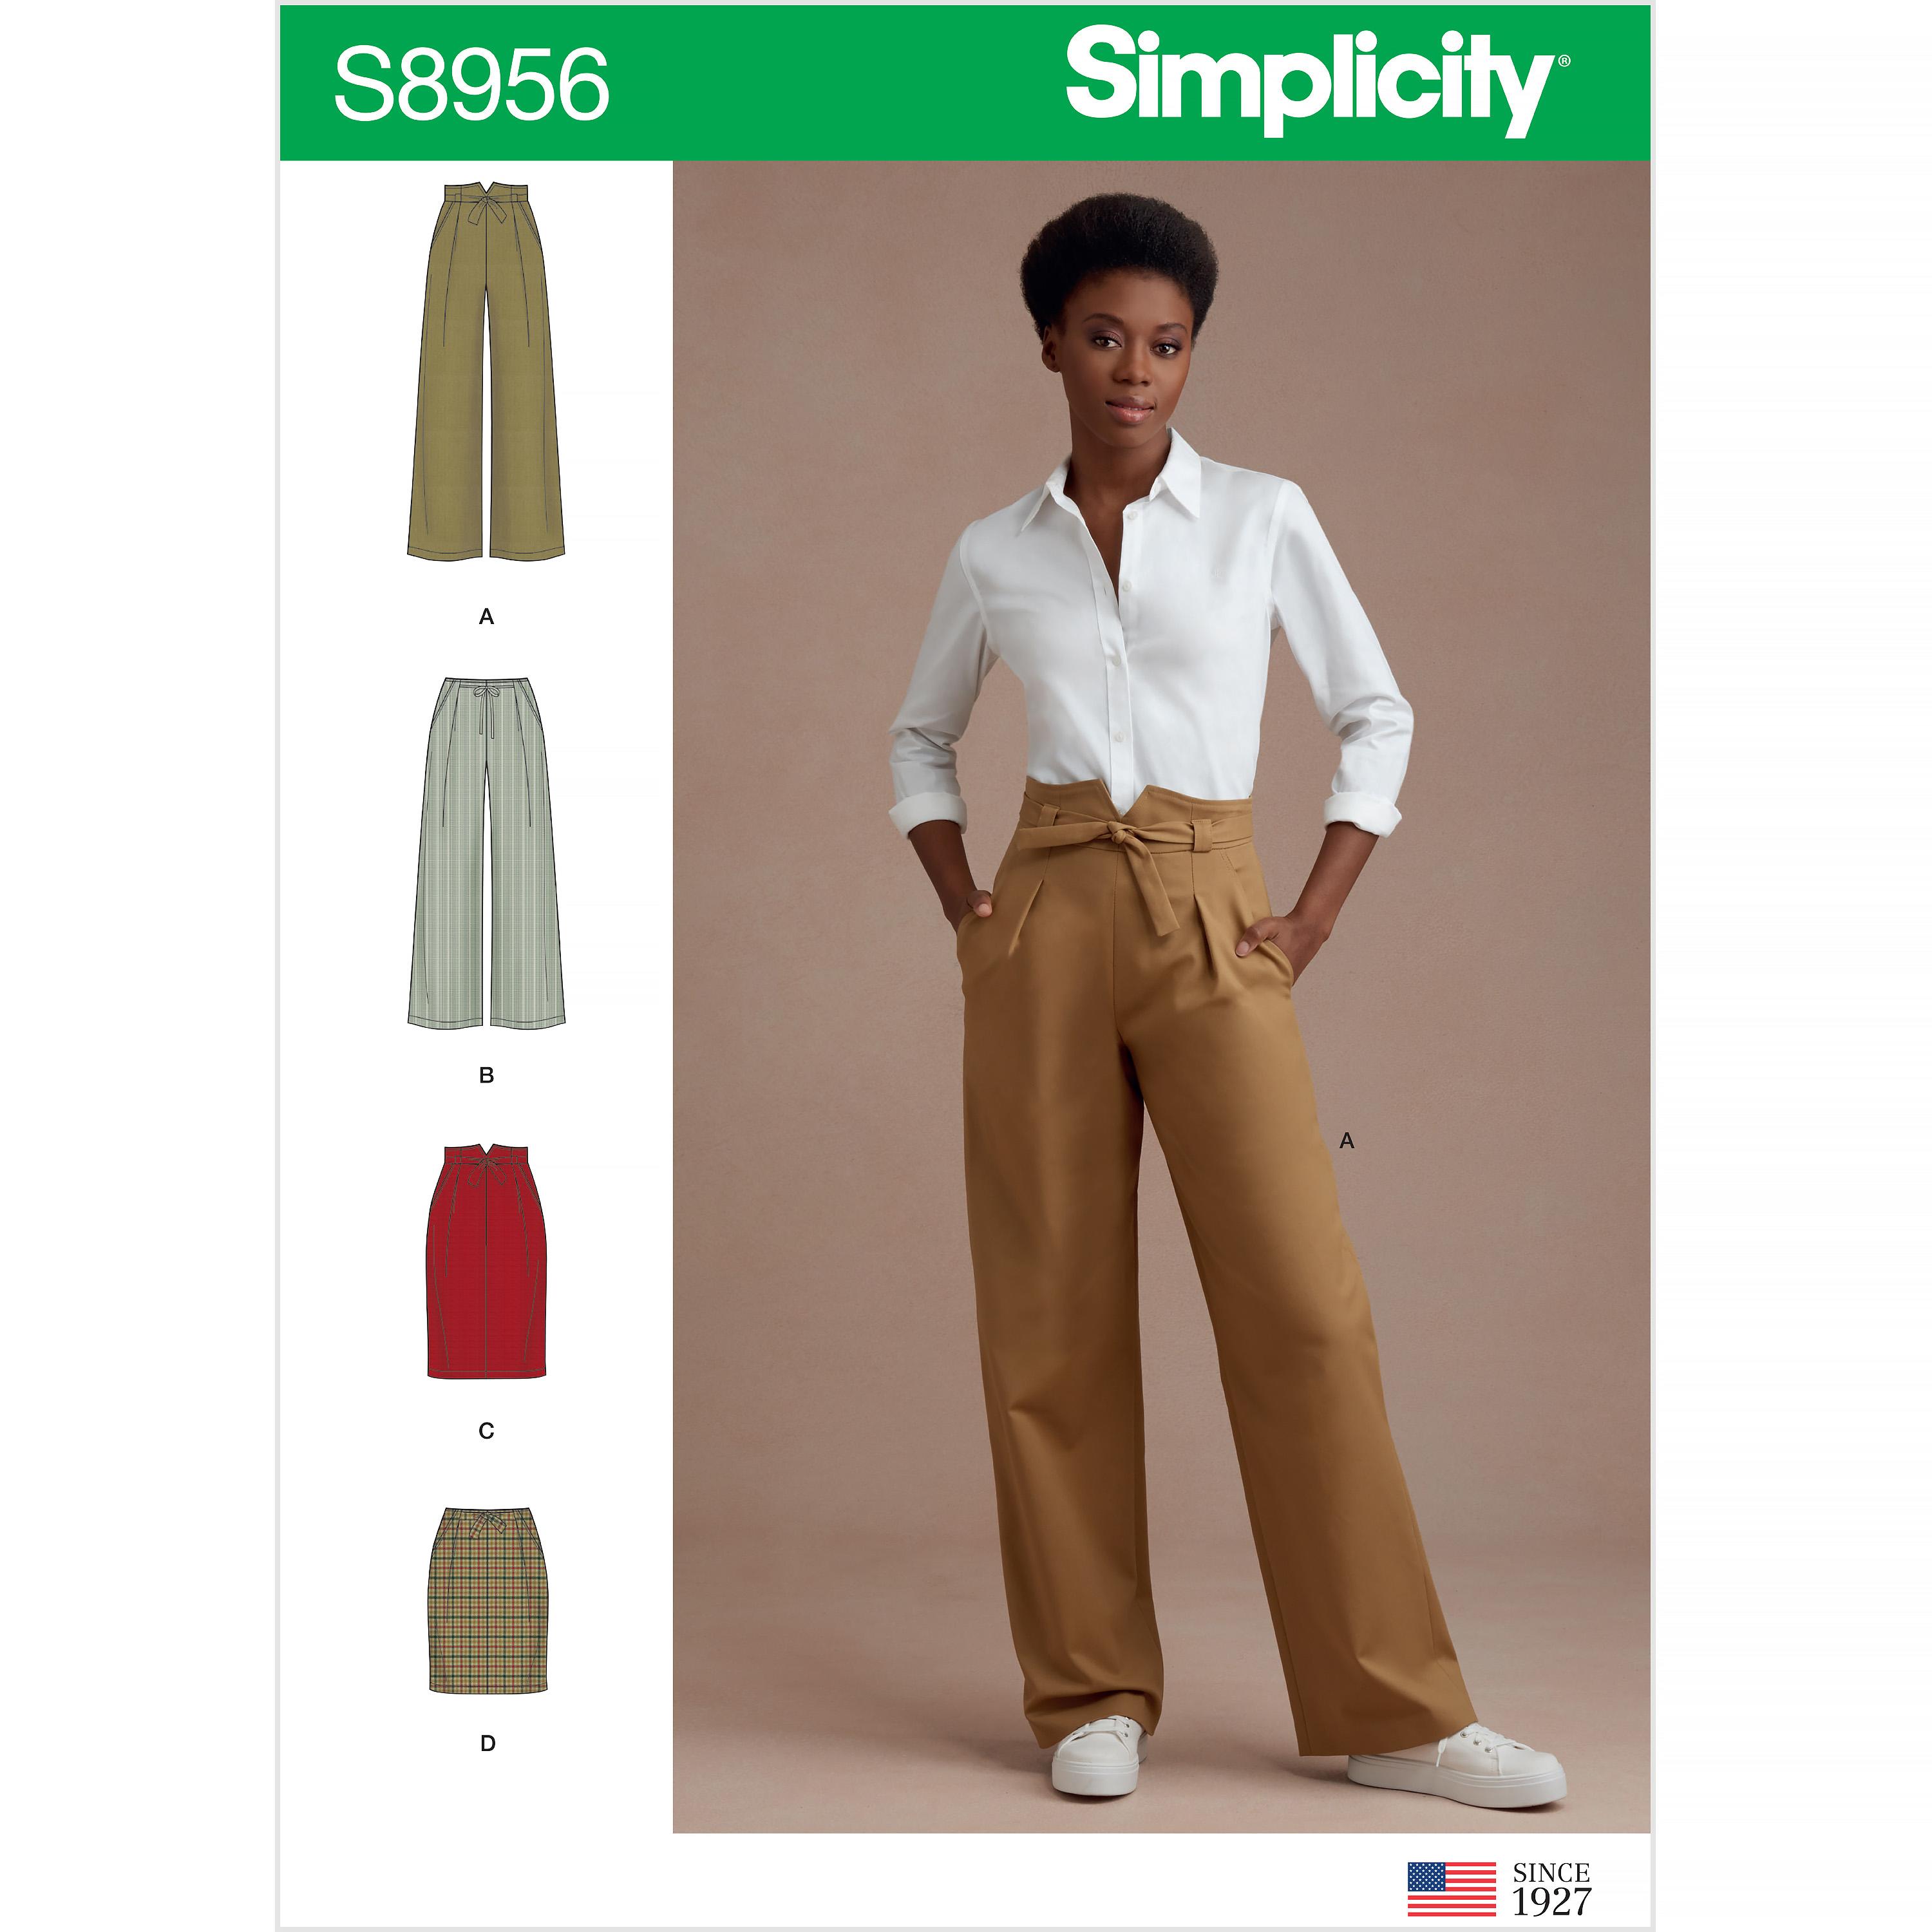 Simplicity S8956 Misses' Pants and Skirts